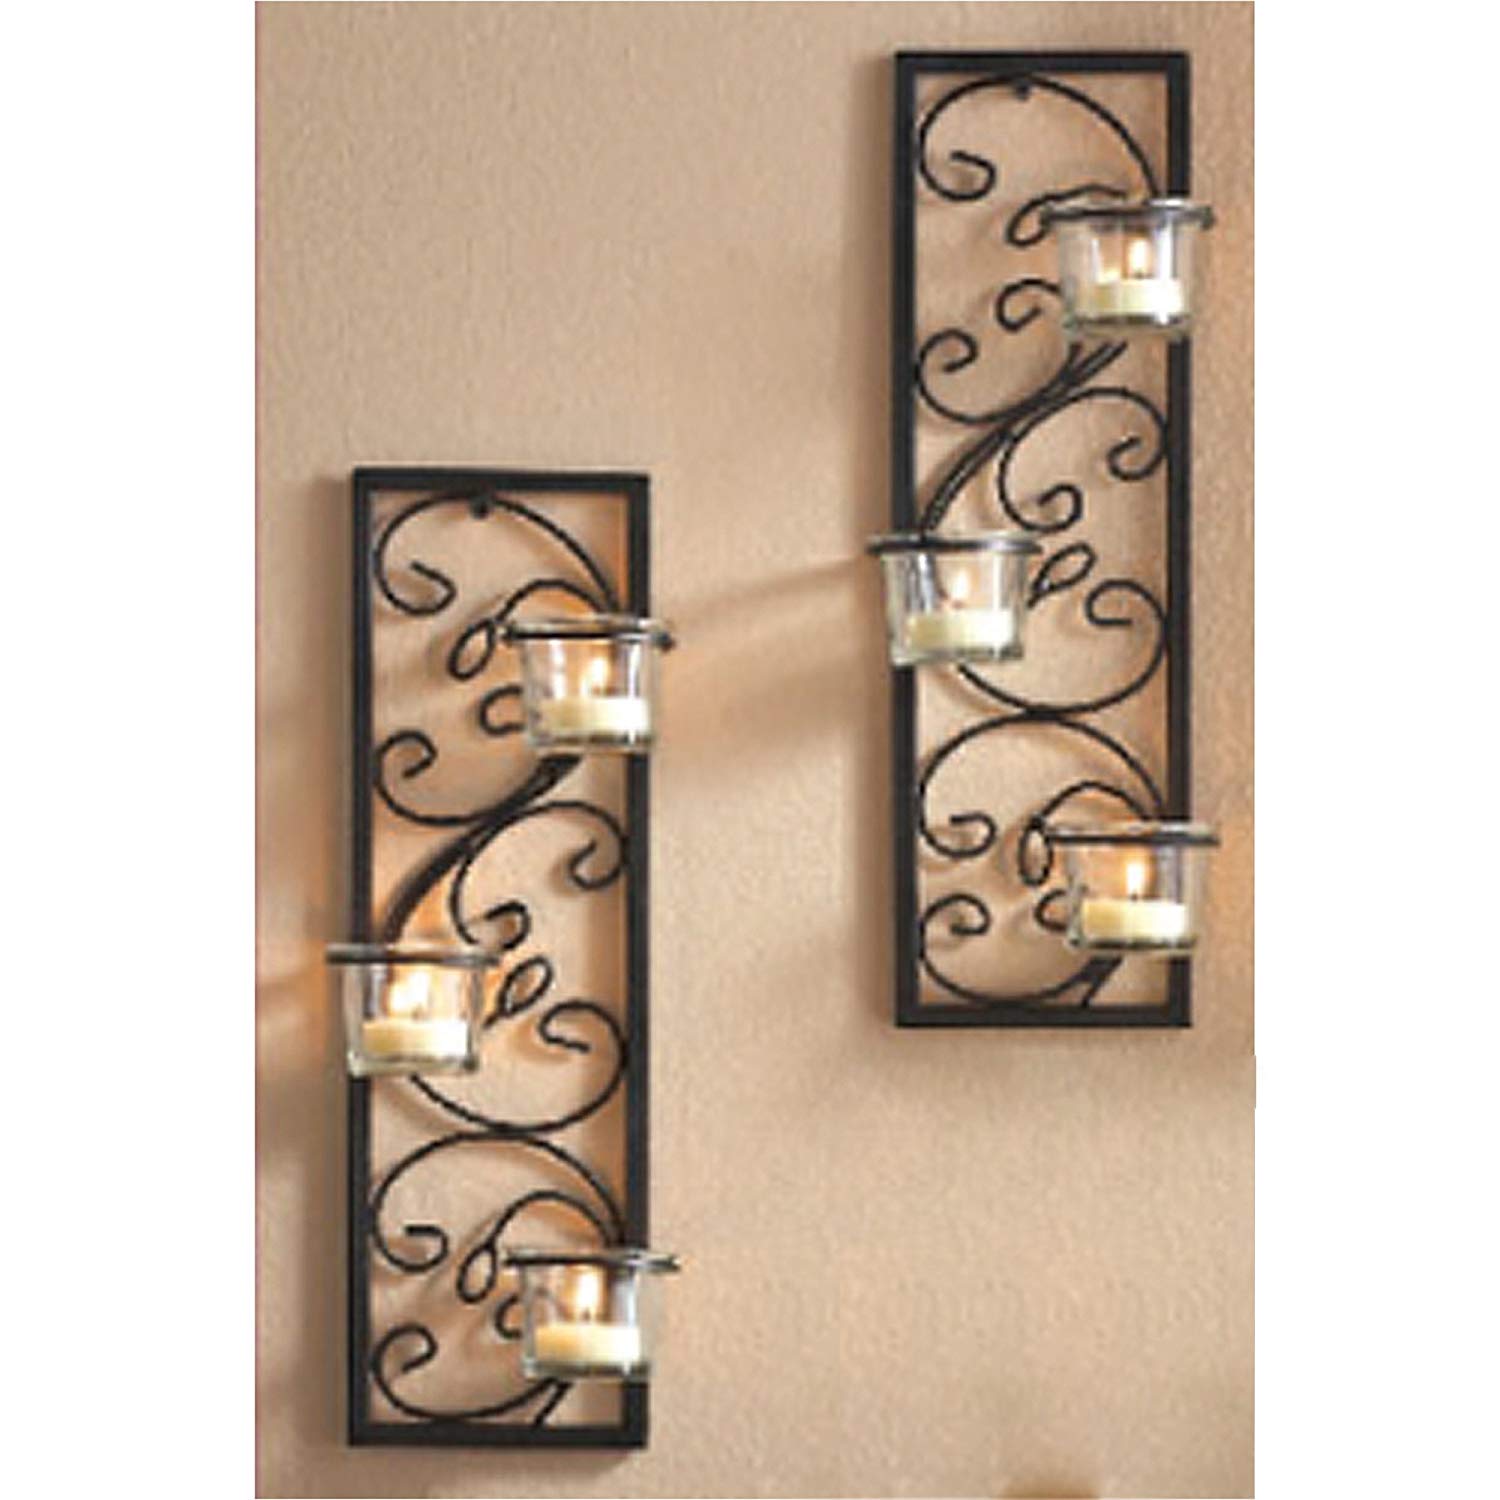 Hosley Set of Two 13.75" High Black Iron Tealight Wall Sconce. Handmade by Artisans. Ideal Gift for Wedding, Party, LED Votive Candle Gardens, Spa, Reiki O3